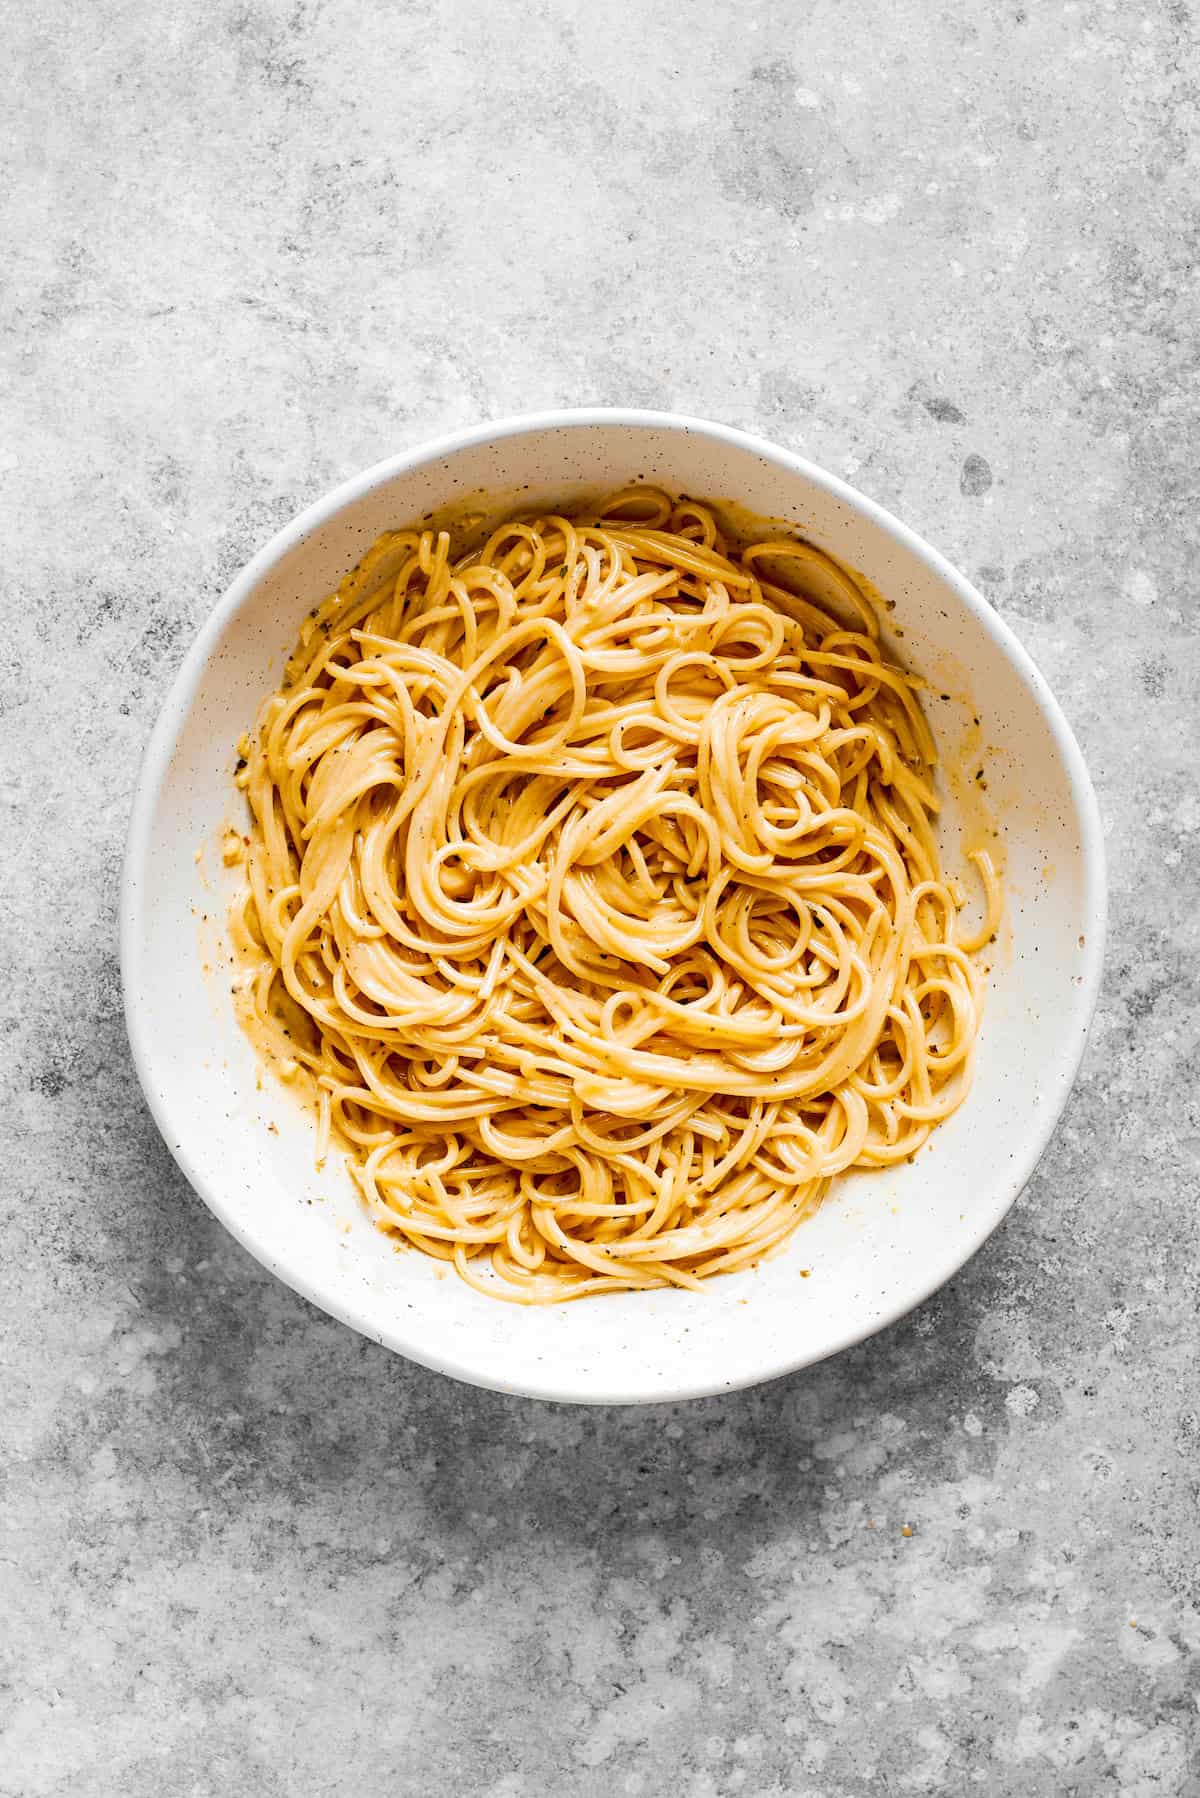 Cooked spaghetti noodles in a white bowl.